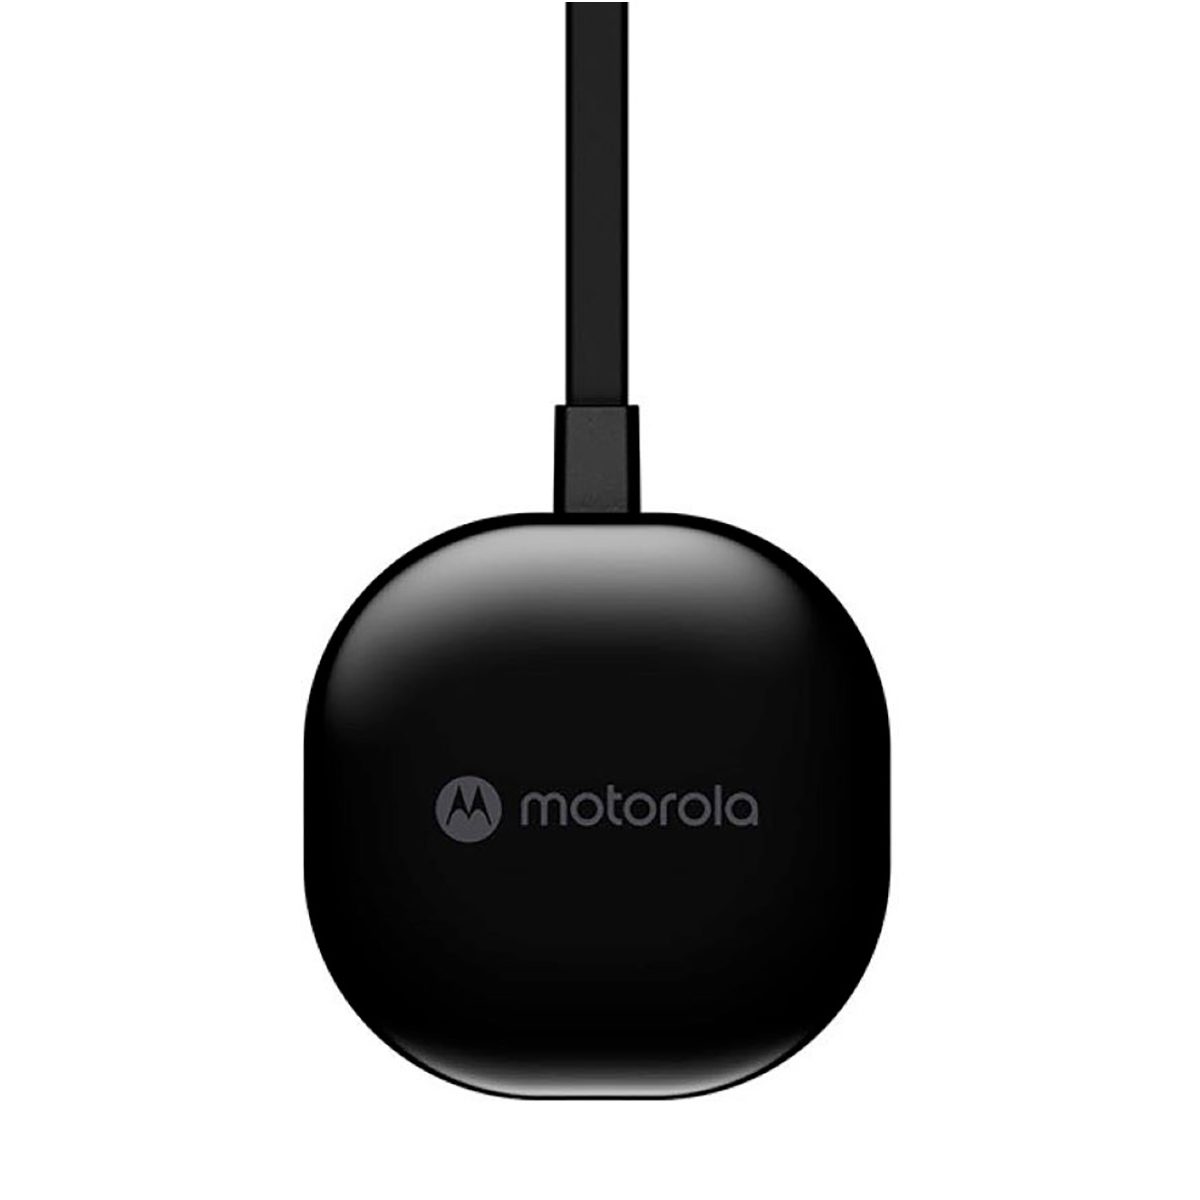 Your Car's Android Auto Might Need the Motorola MA1 and It's Discounted